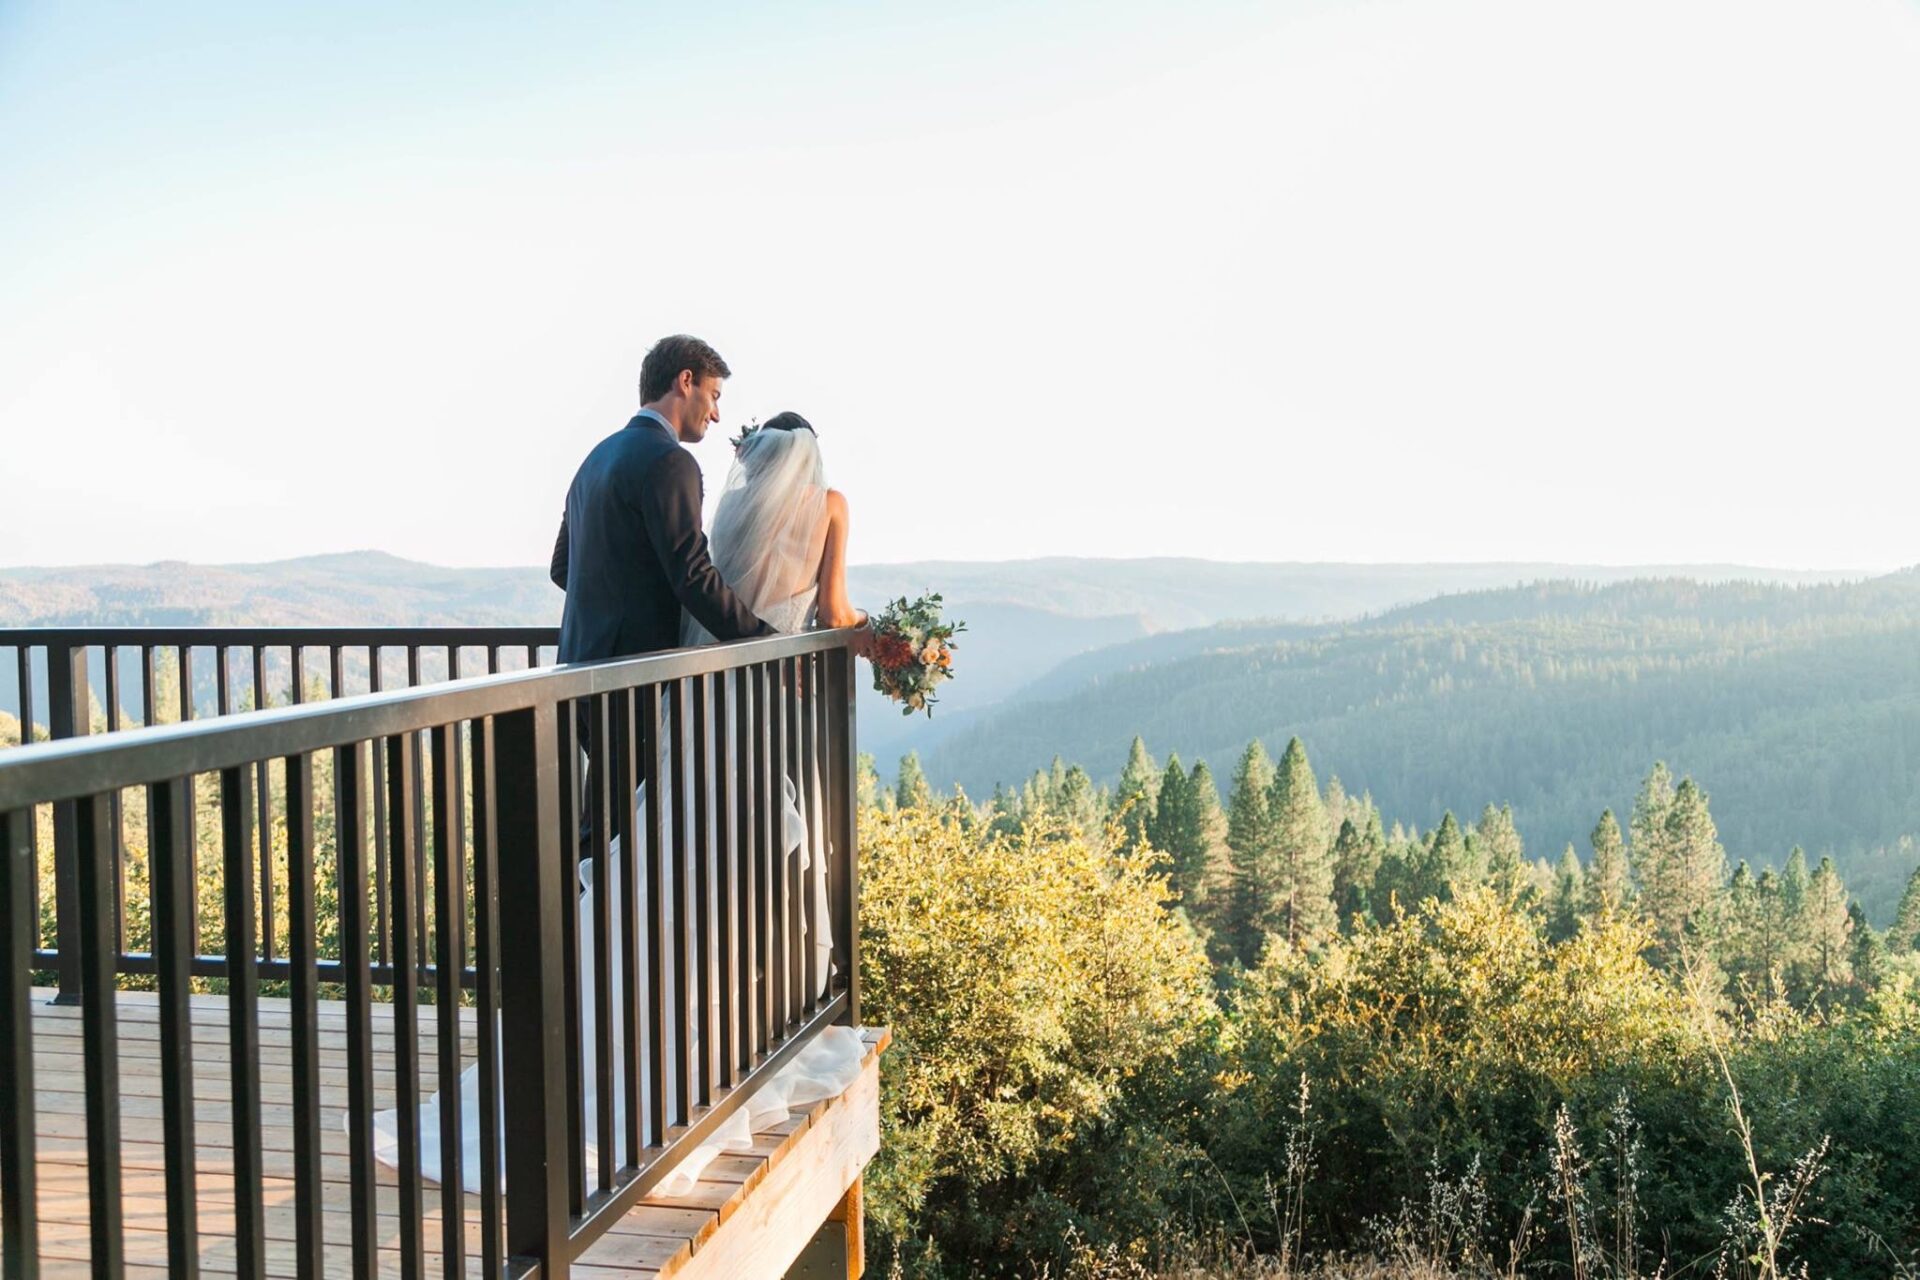 A bride and groom overlooking a mountainscape.